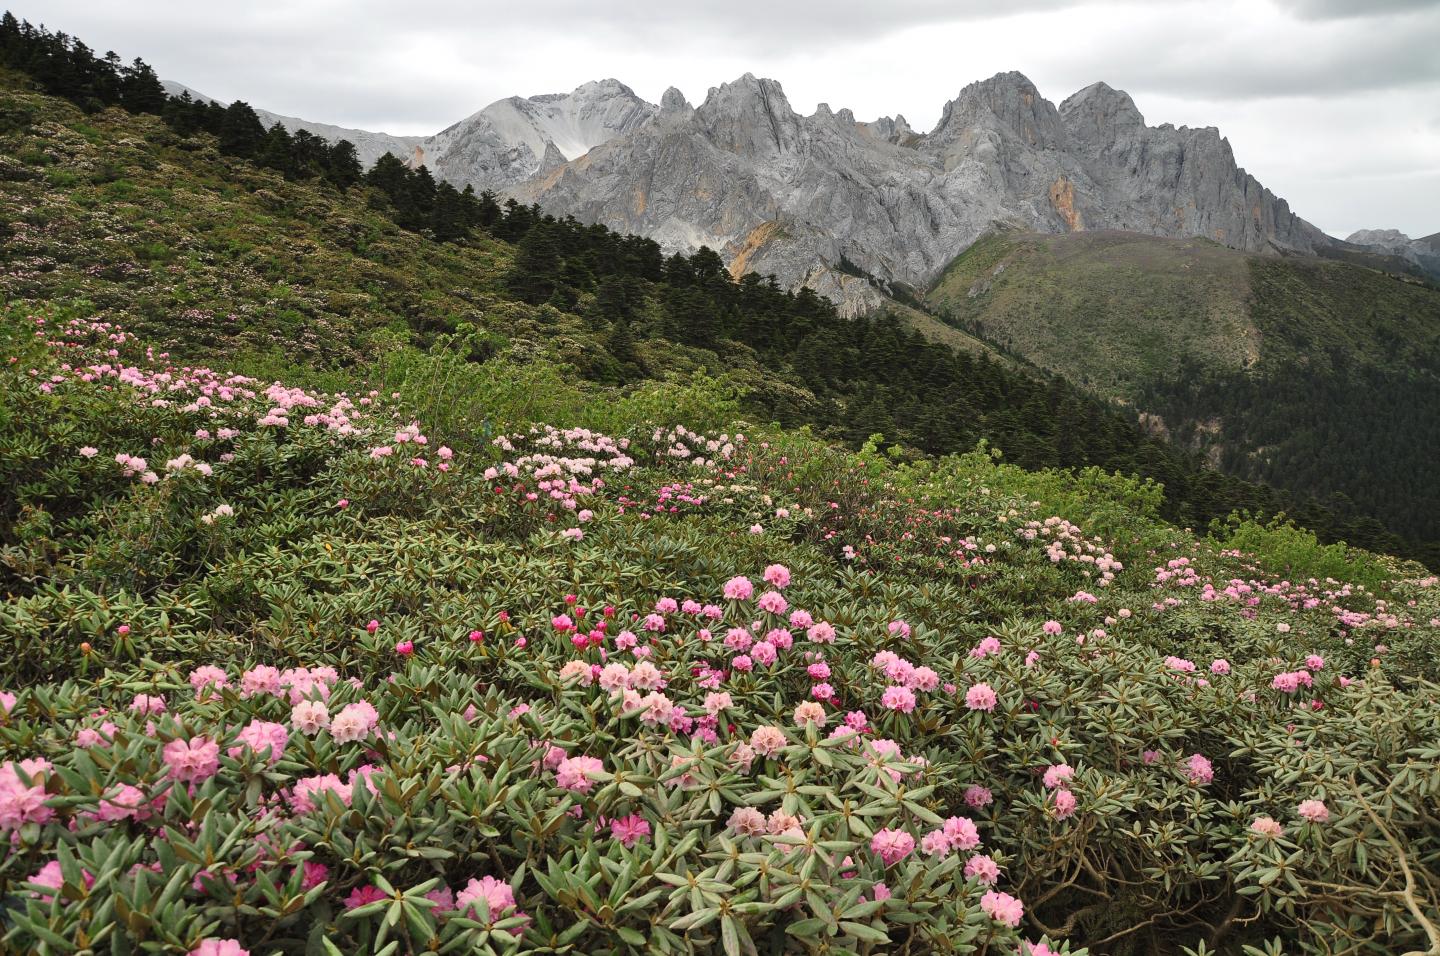 Plants in the Hengduan Mountains